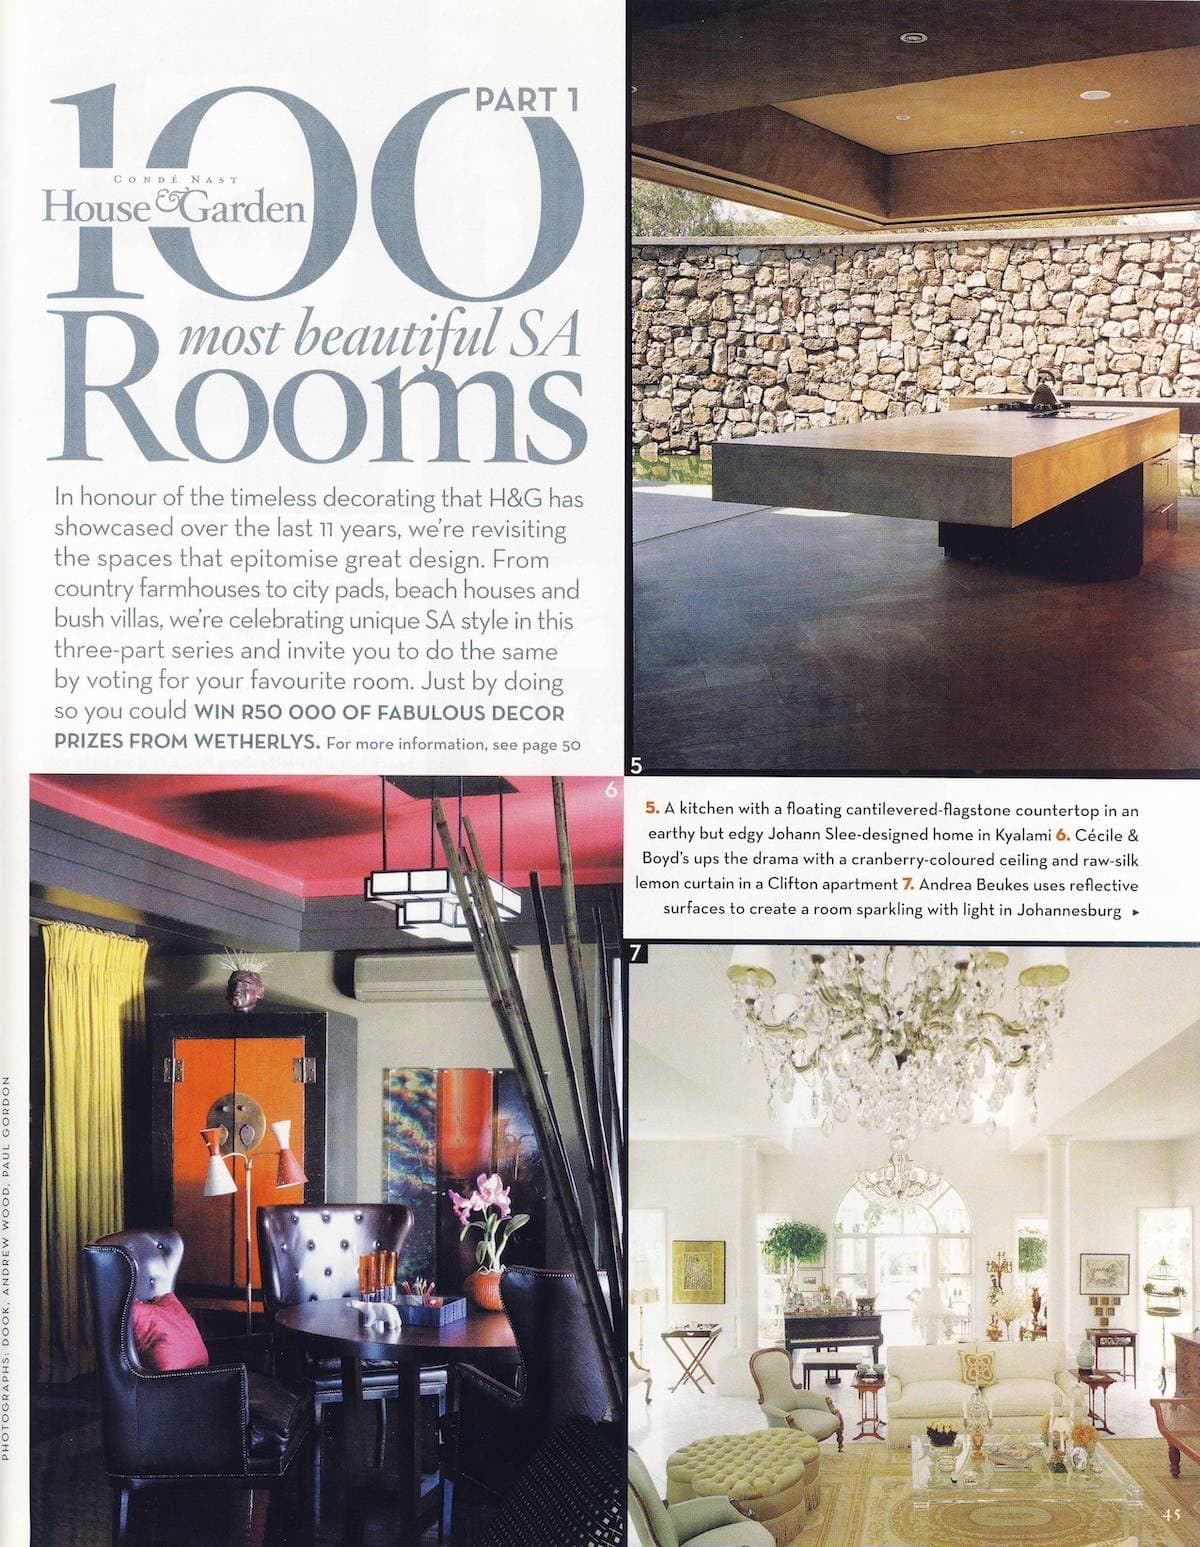 2009 House & Garden Most Beautiful Rooms Pg01